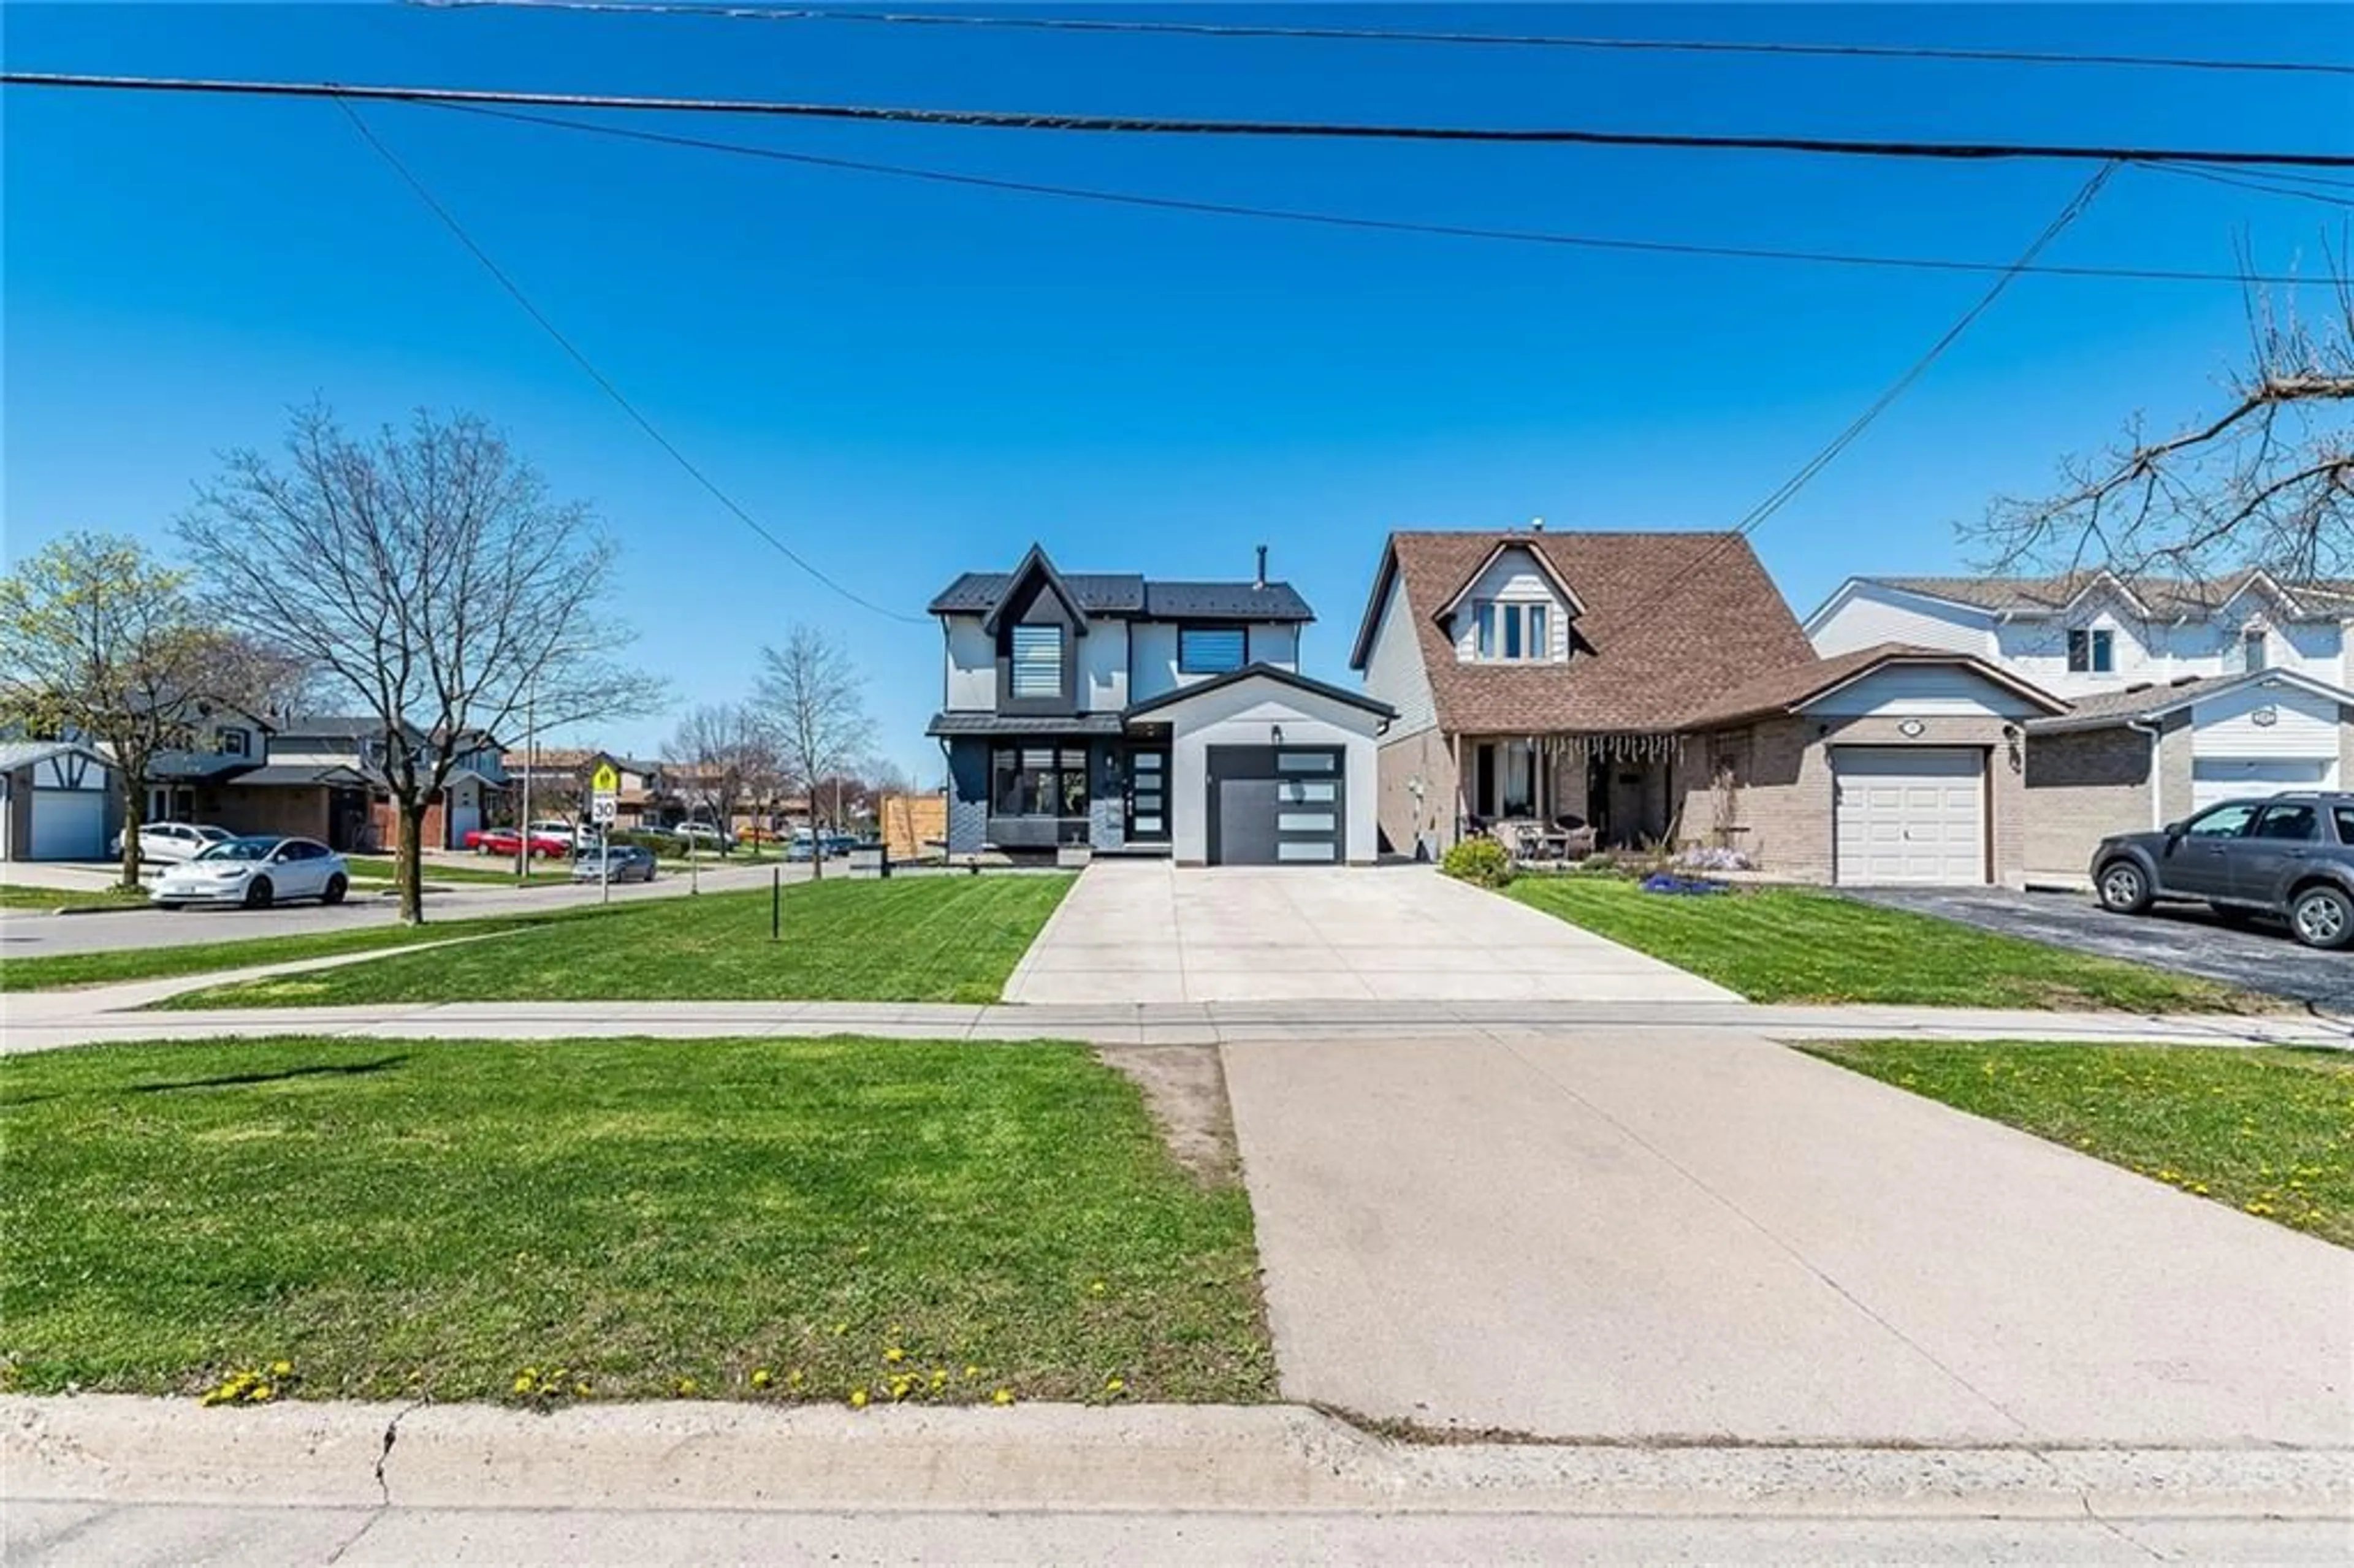 Frontside or backside of a home for 123 Dewitt Rd, Stoney Creek Ontario L8G 4E3